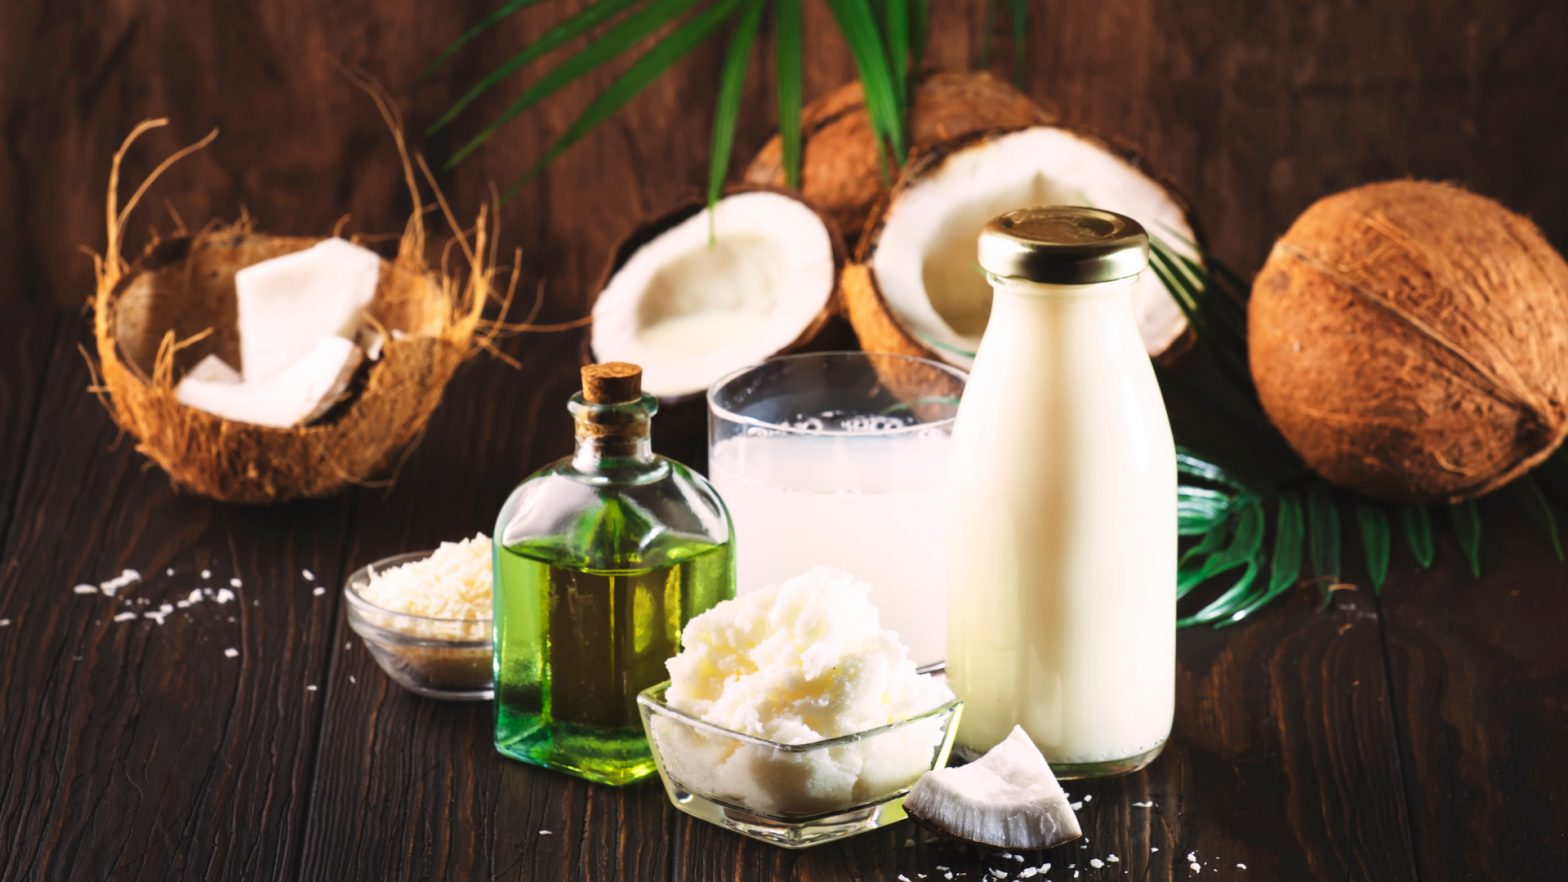 Coconut Products Market